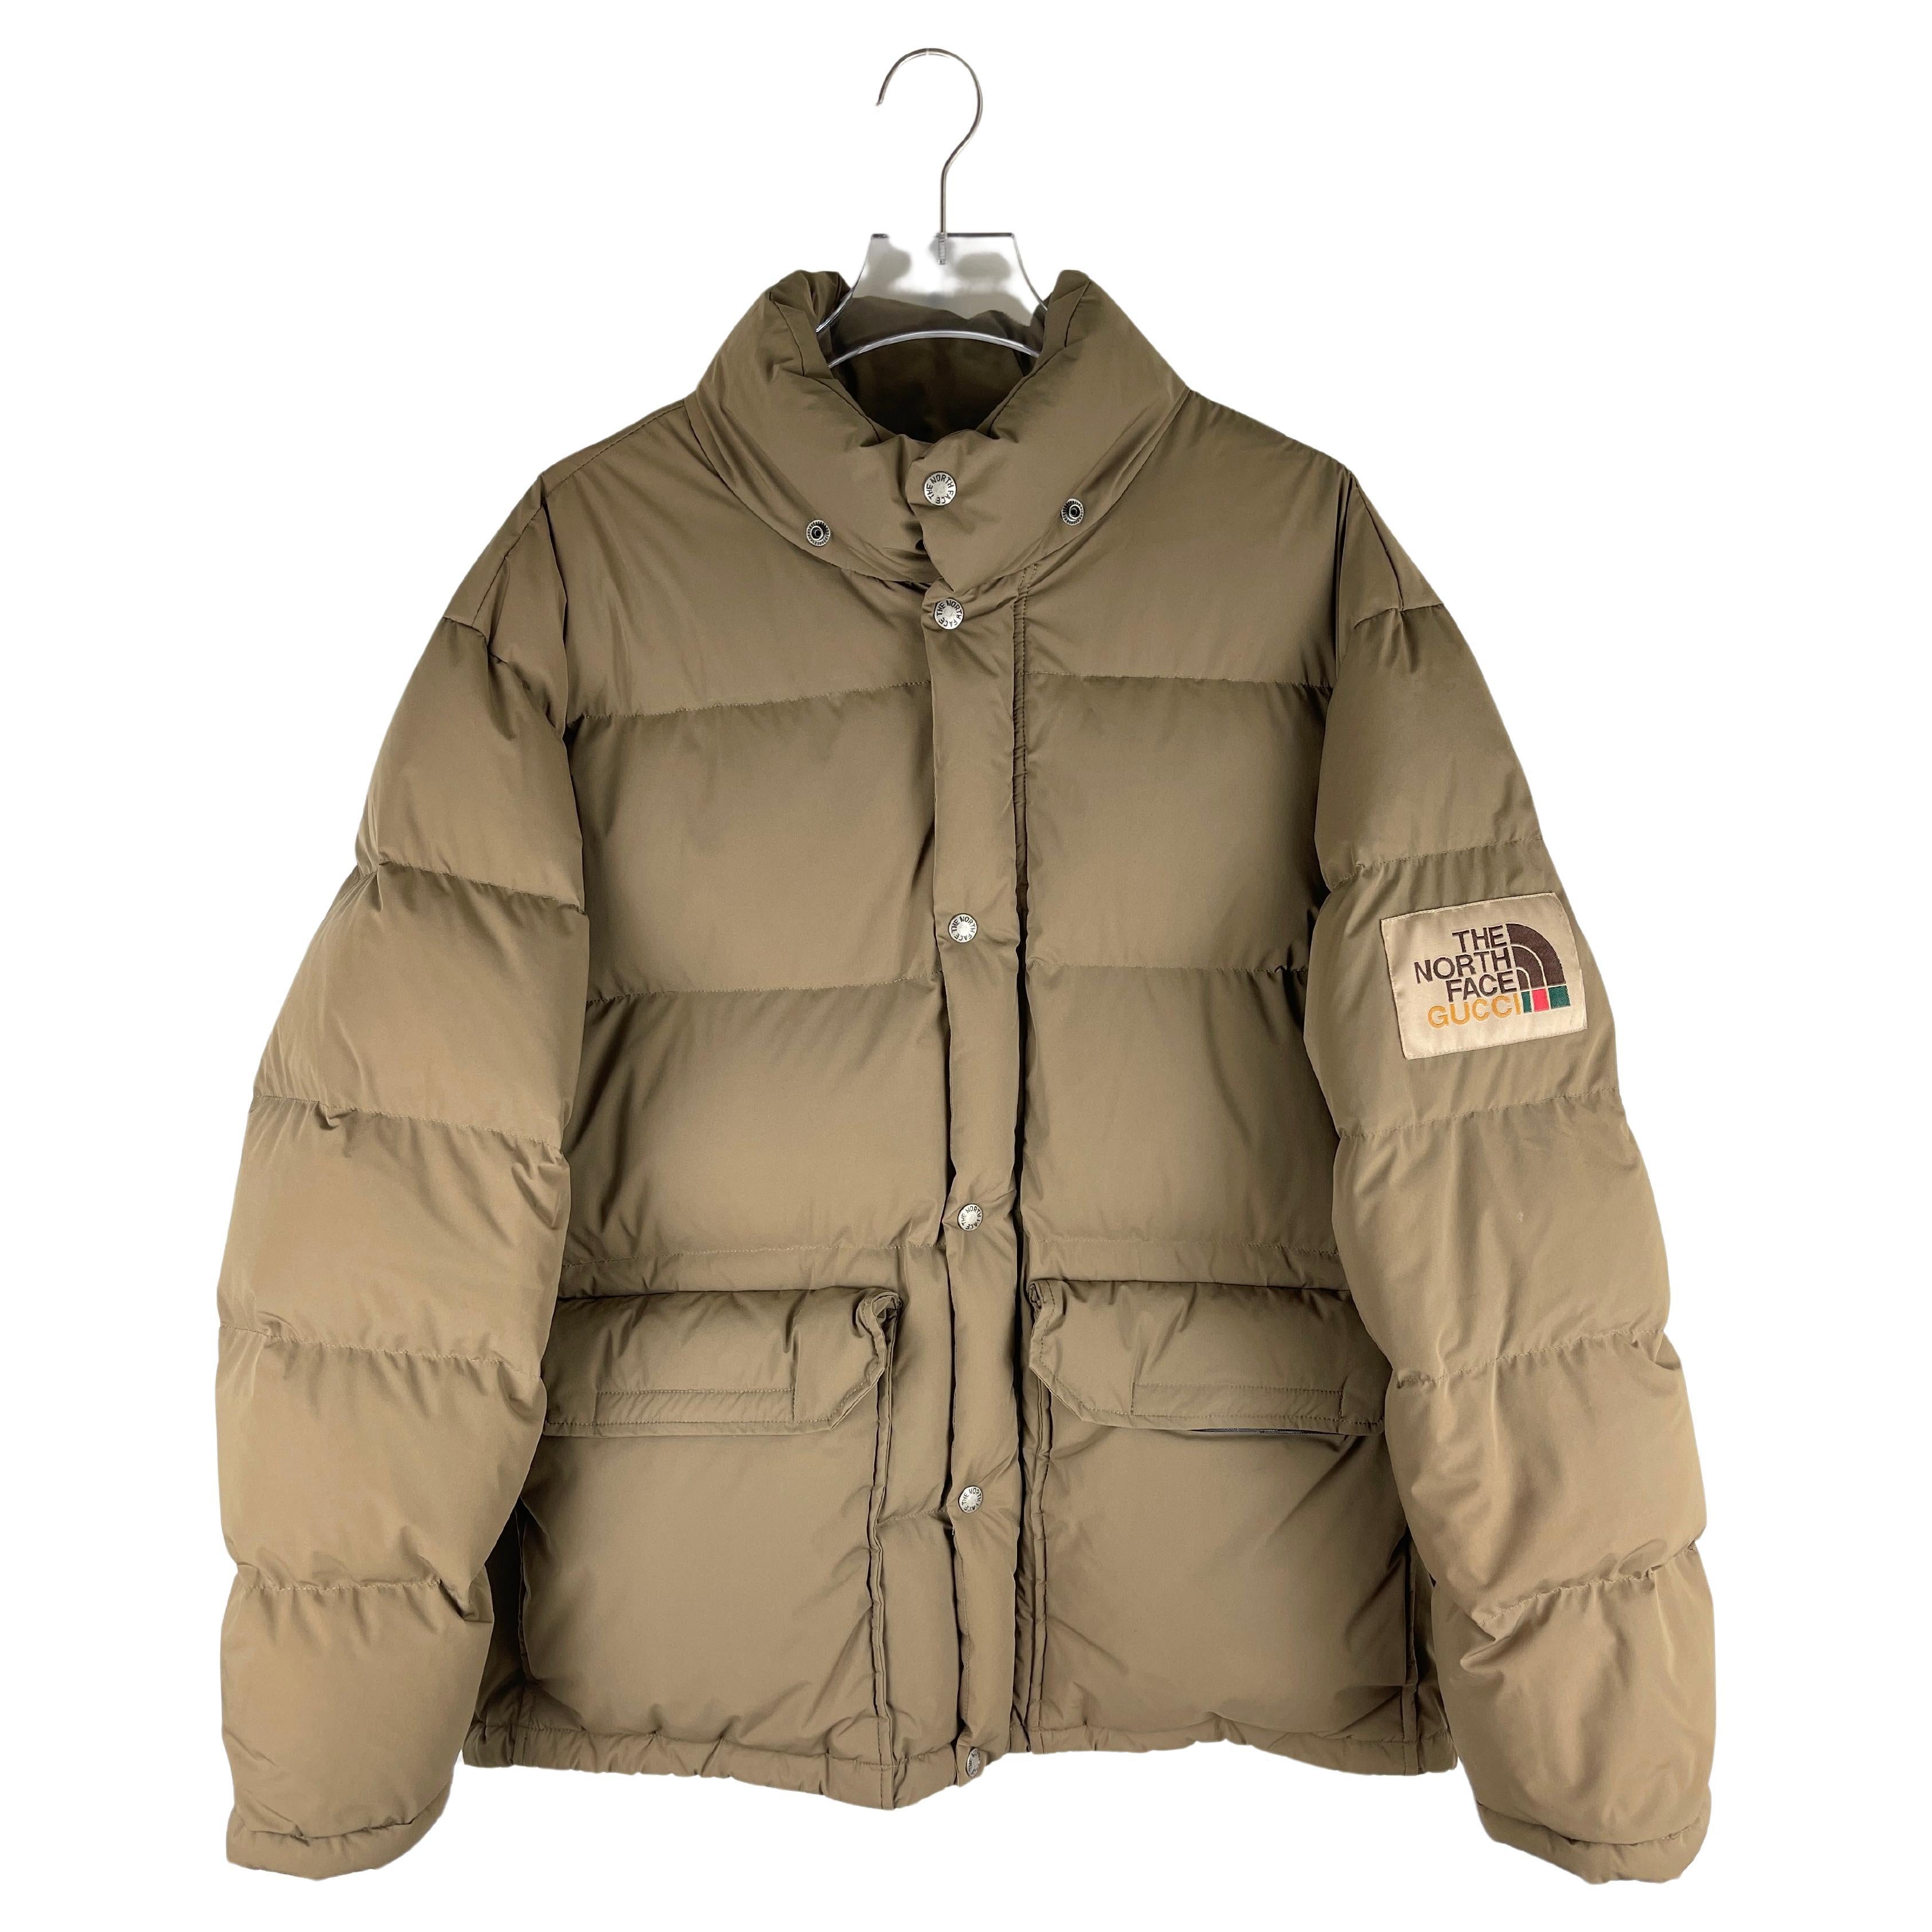 Gucci x The North Face Nuptse Goose Down Jacket For Sale